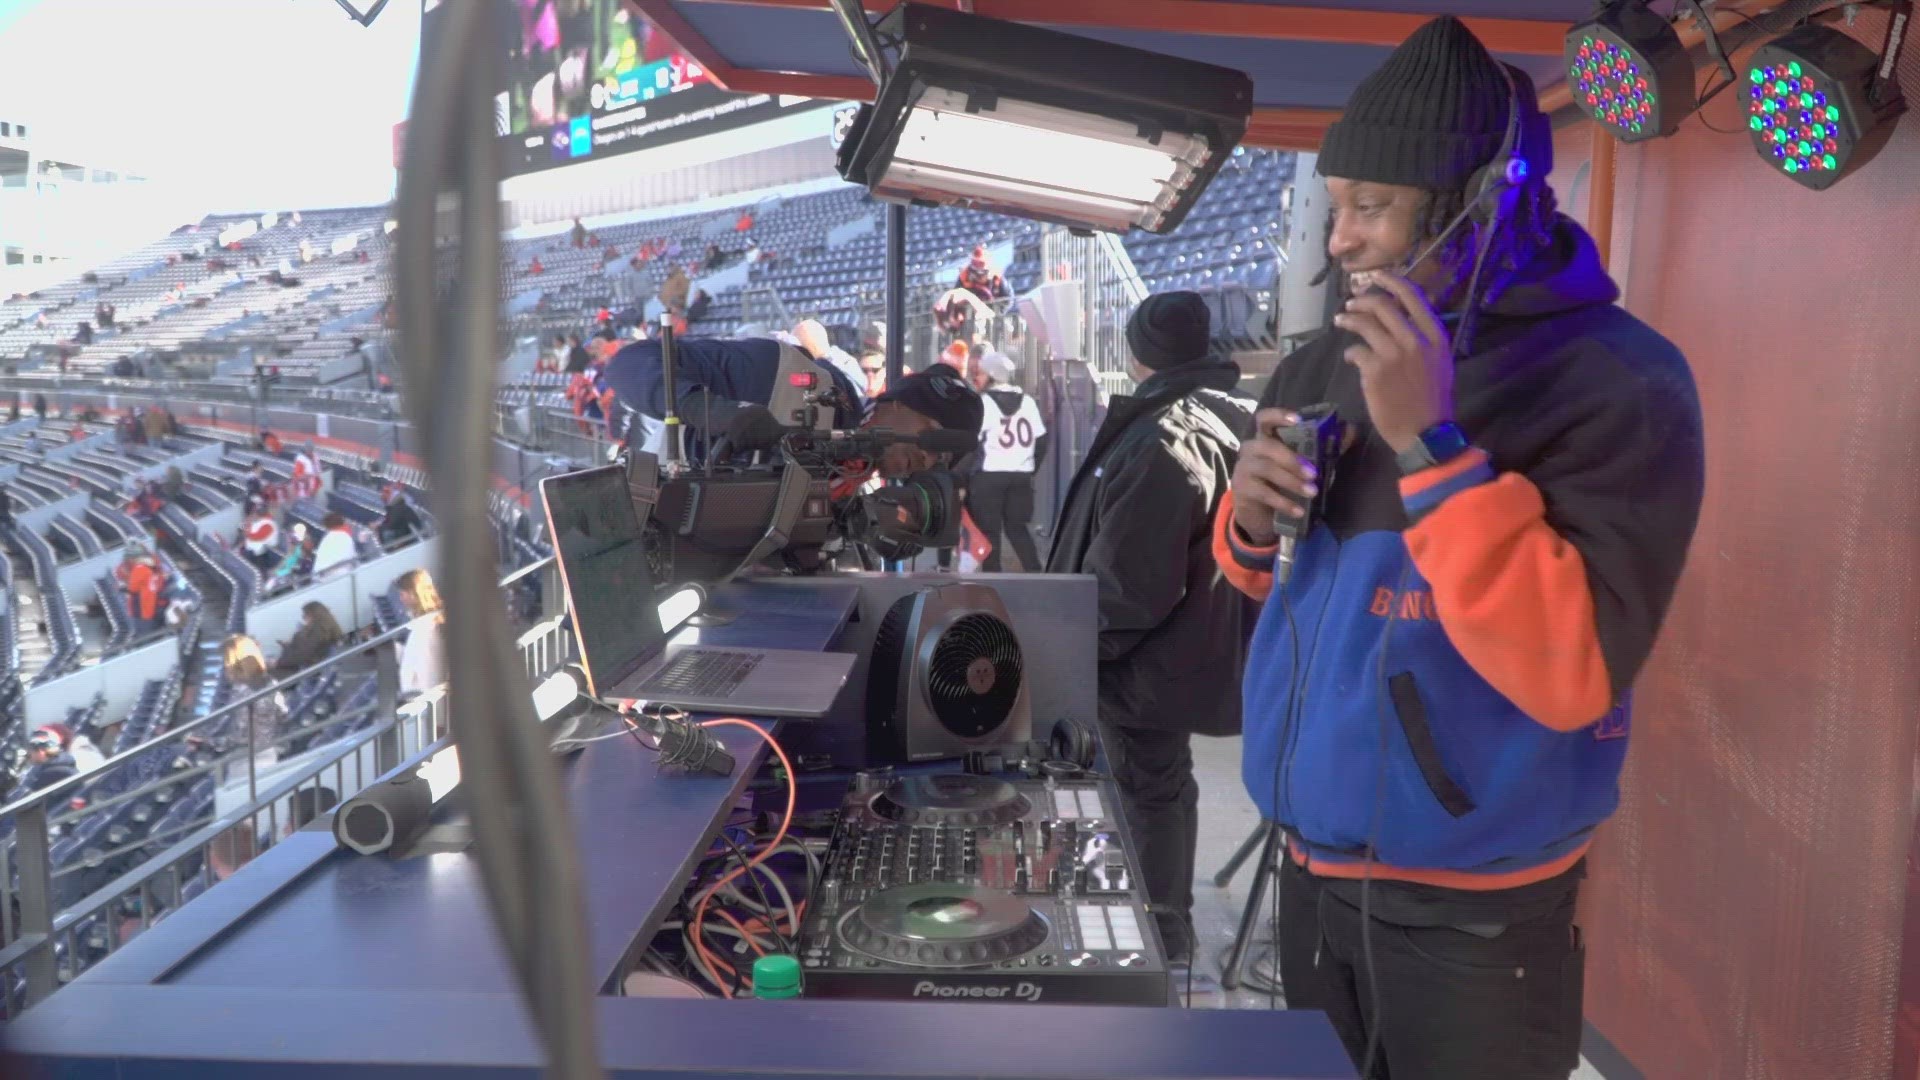 Squizzy Taylor matches moments to music for the Broncos and fans at Empower Field at Mile High.